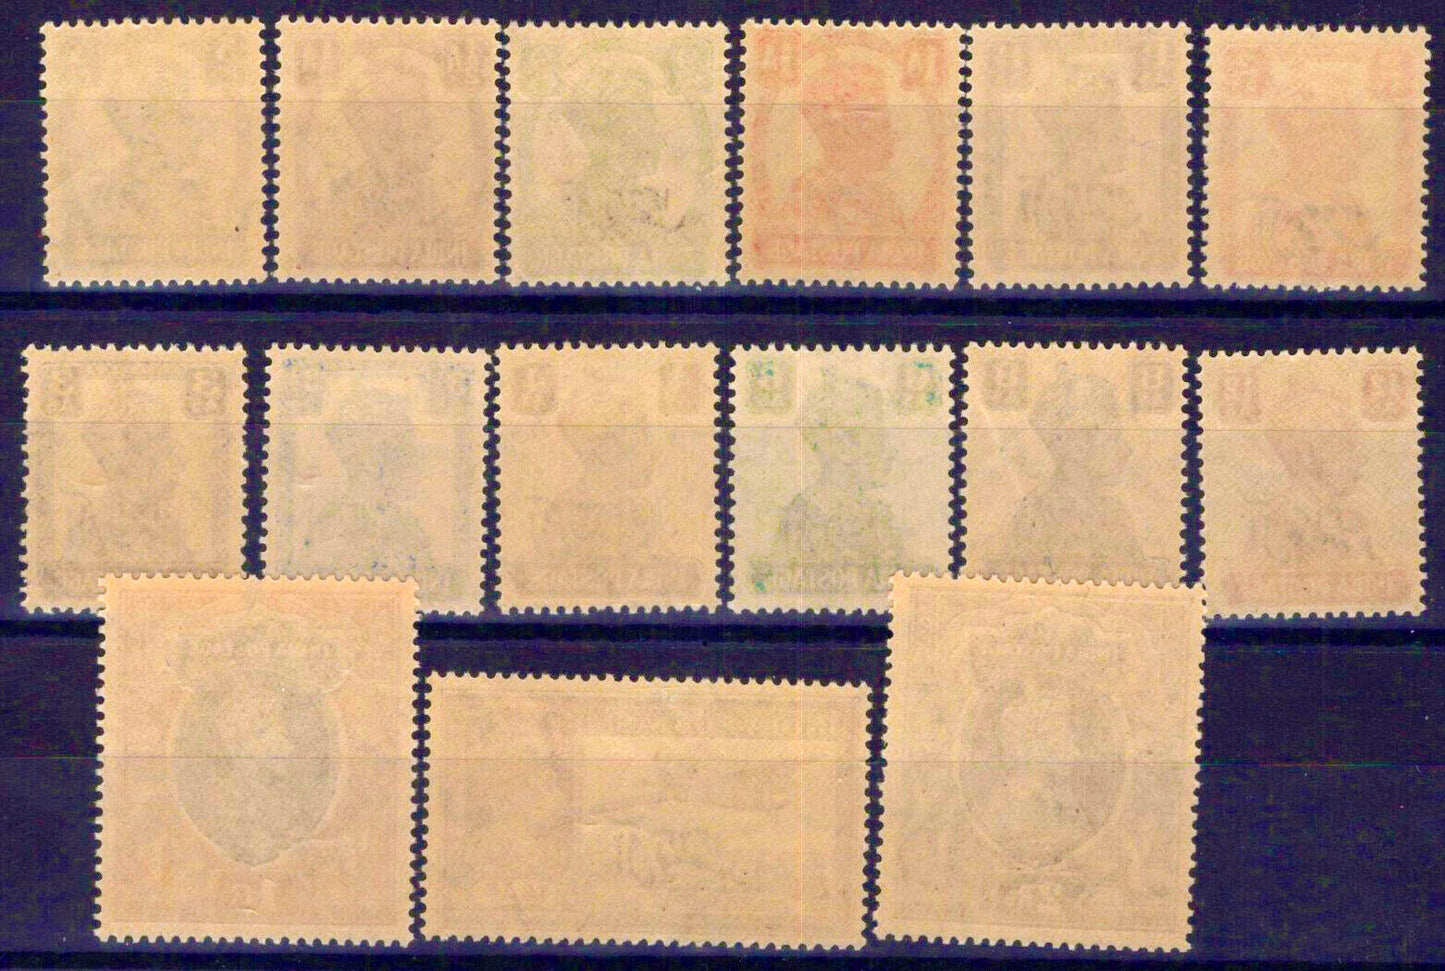 ZAYIX Oman 1-15 MNH/MLH (3 values) Overprints on stamps of India 021823S161